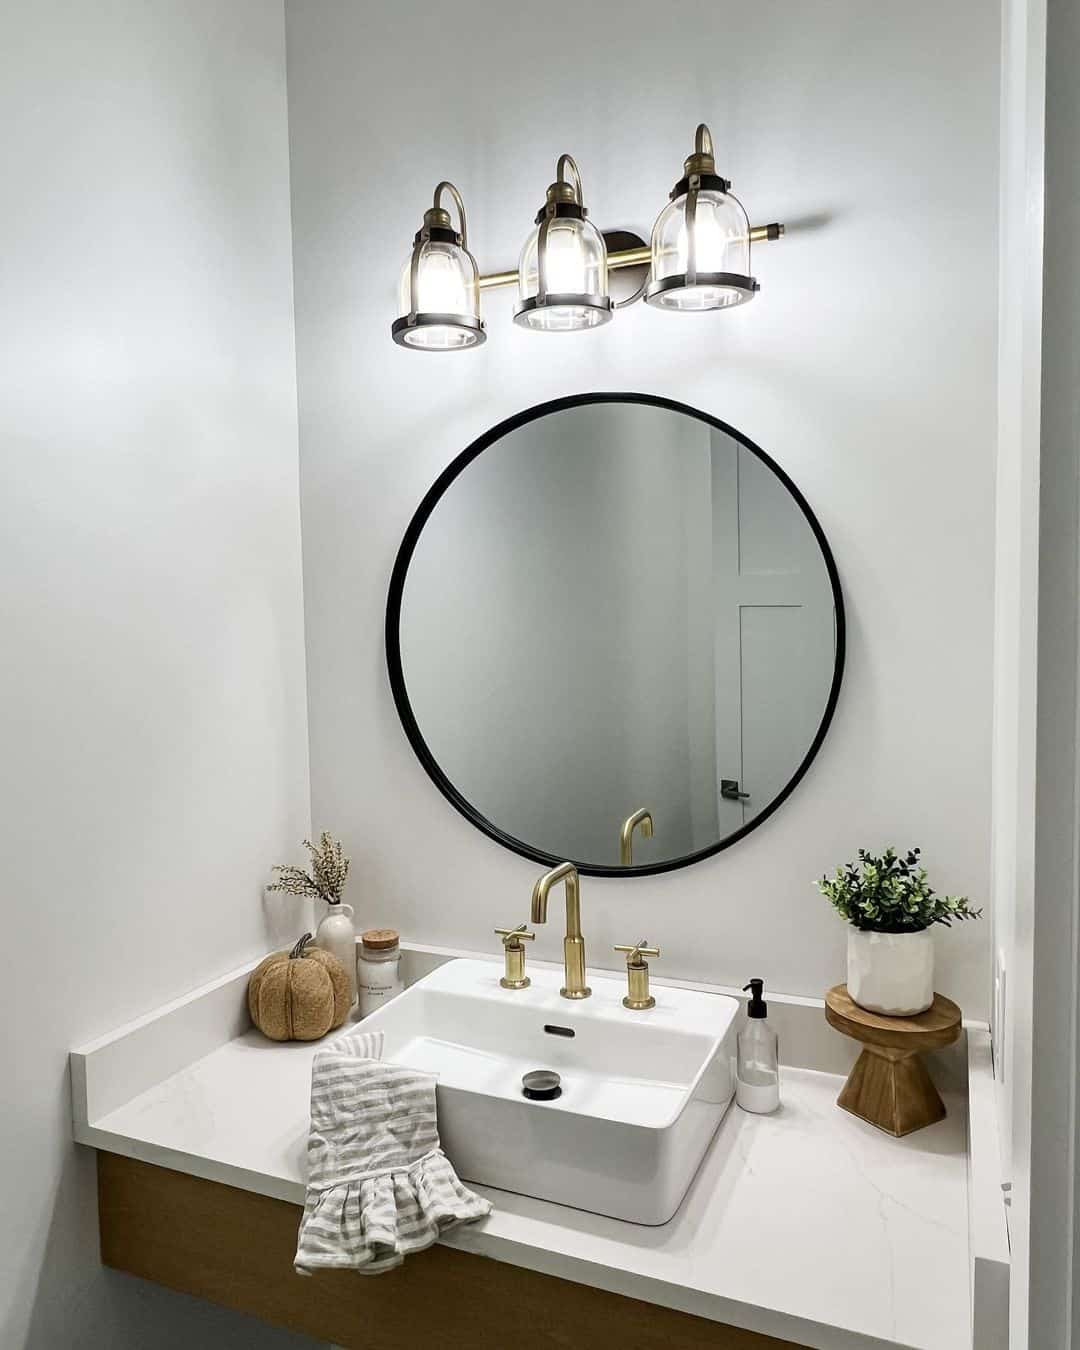 30 Unique Bathroom Sink Ideas for a Refined and Tasteful